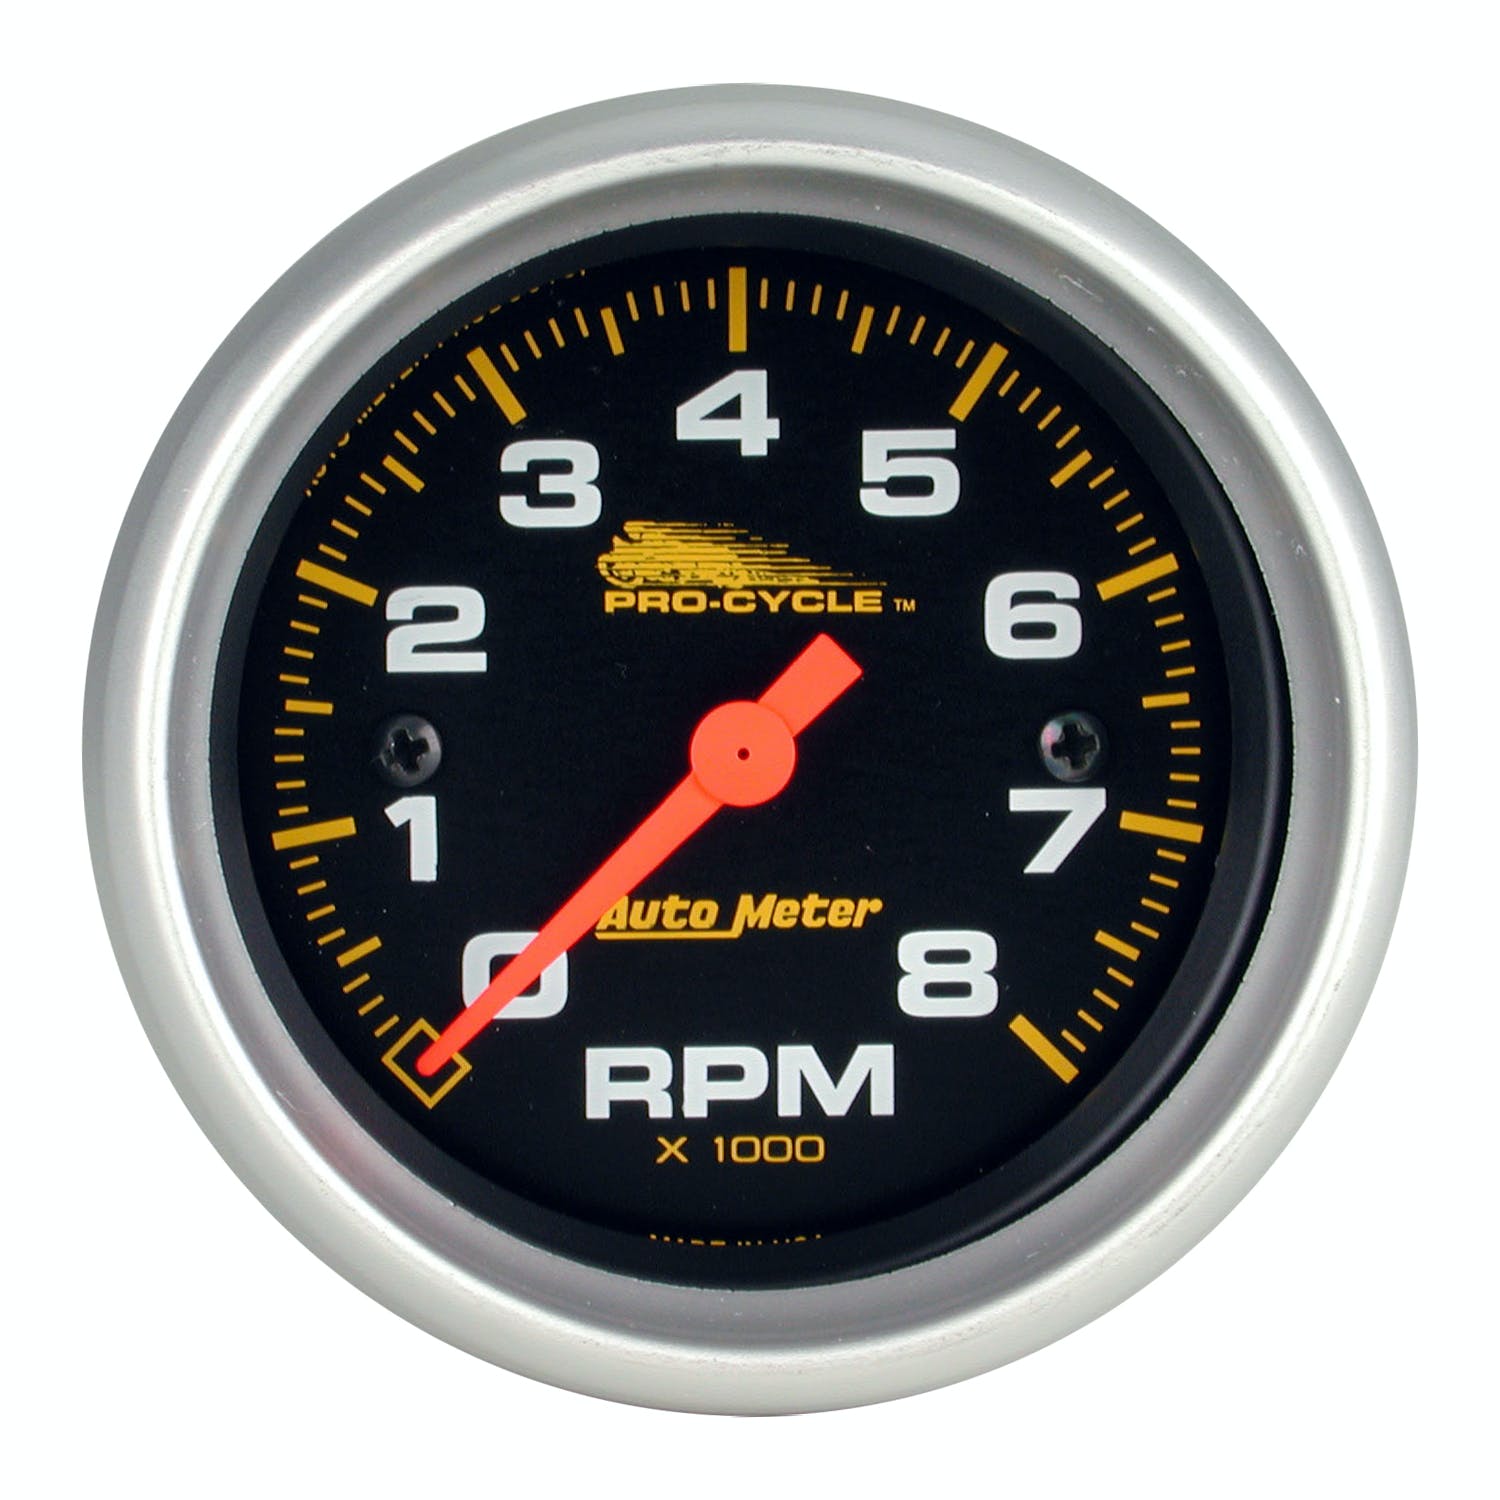 AutoMeter Products 19324 Tachometer Gauge, Black-Pro Cycle 2 5/8, 8K RPM, 2and4 Cylinder